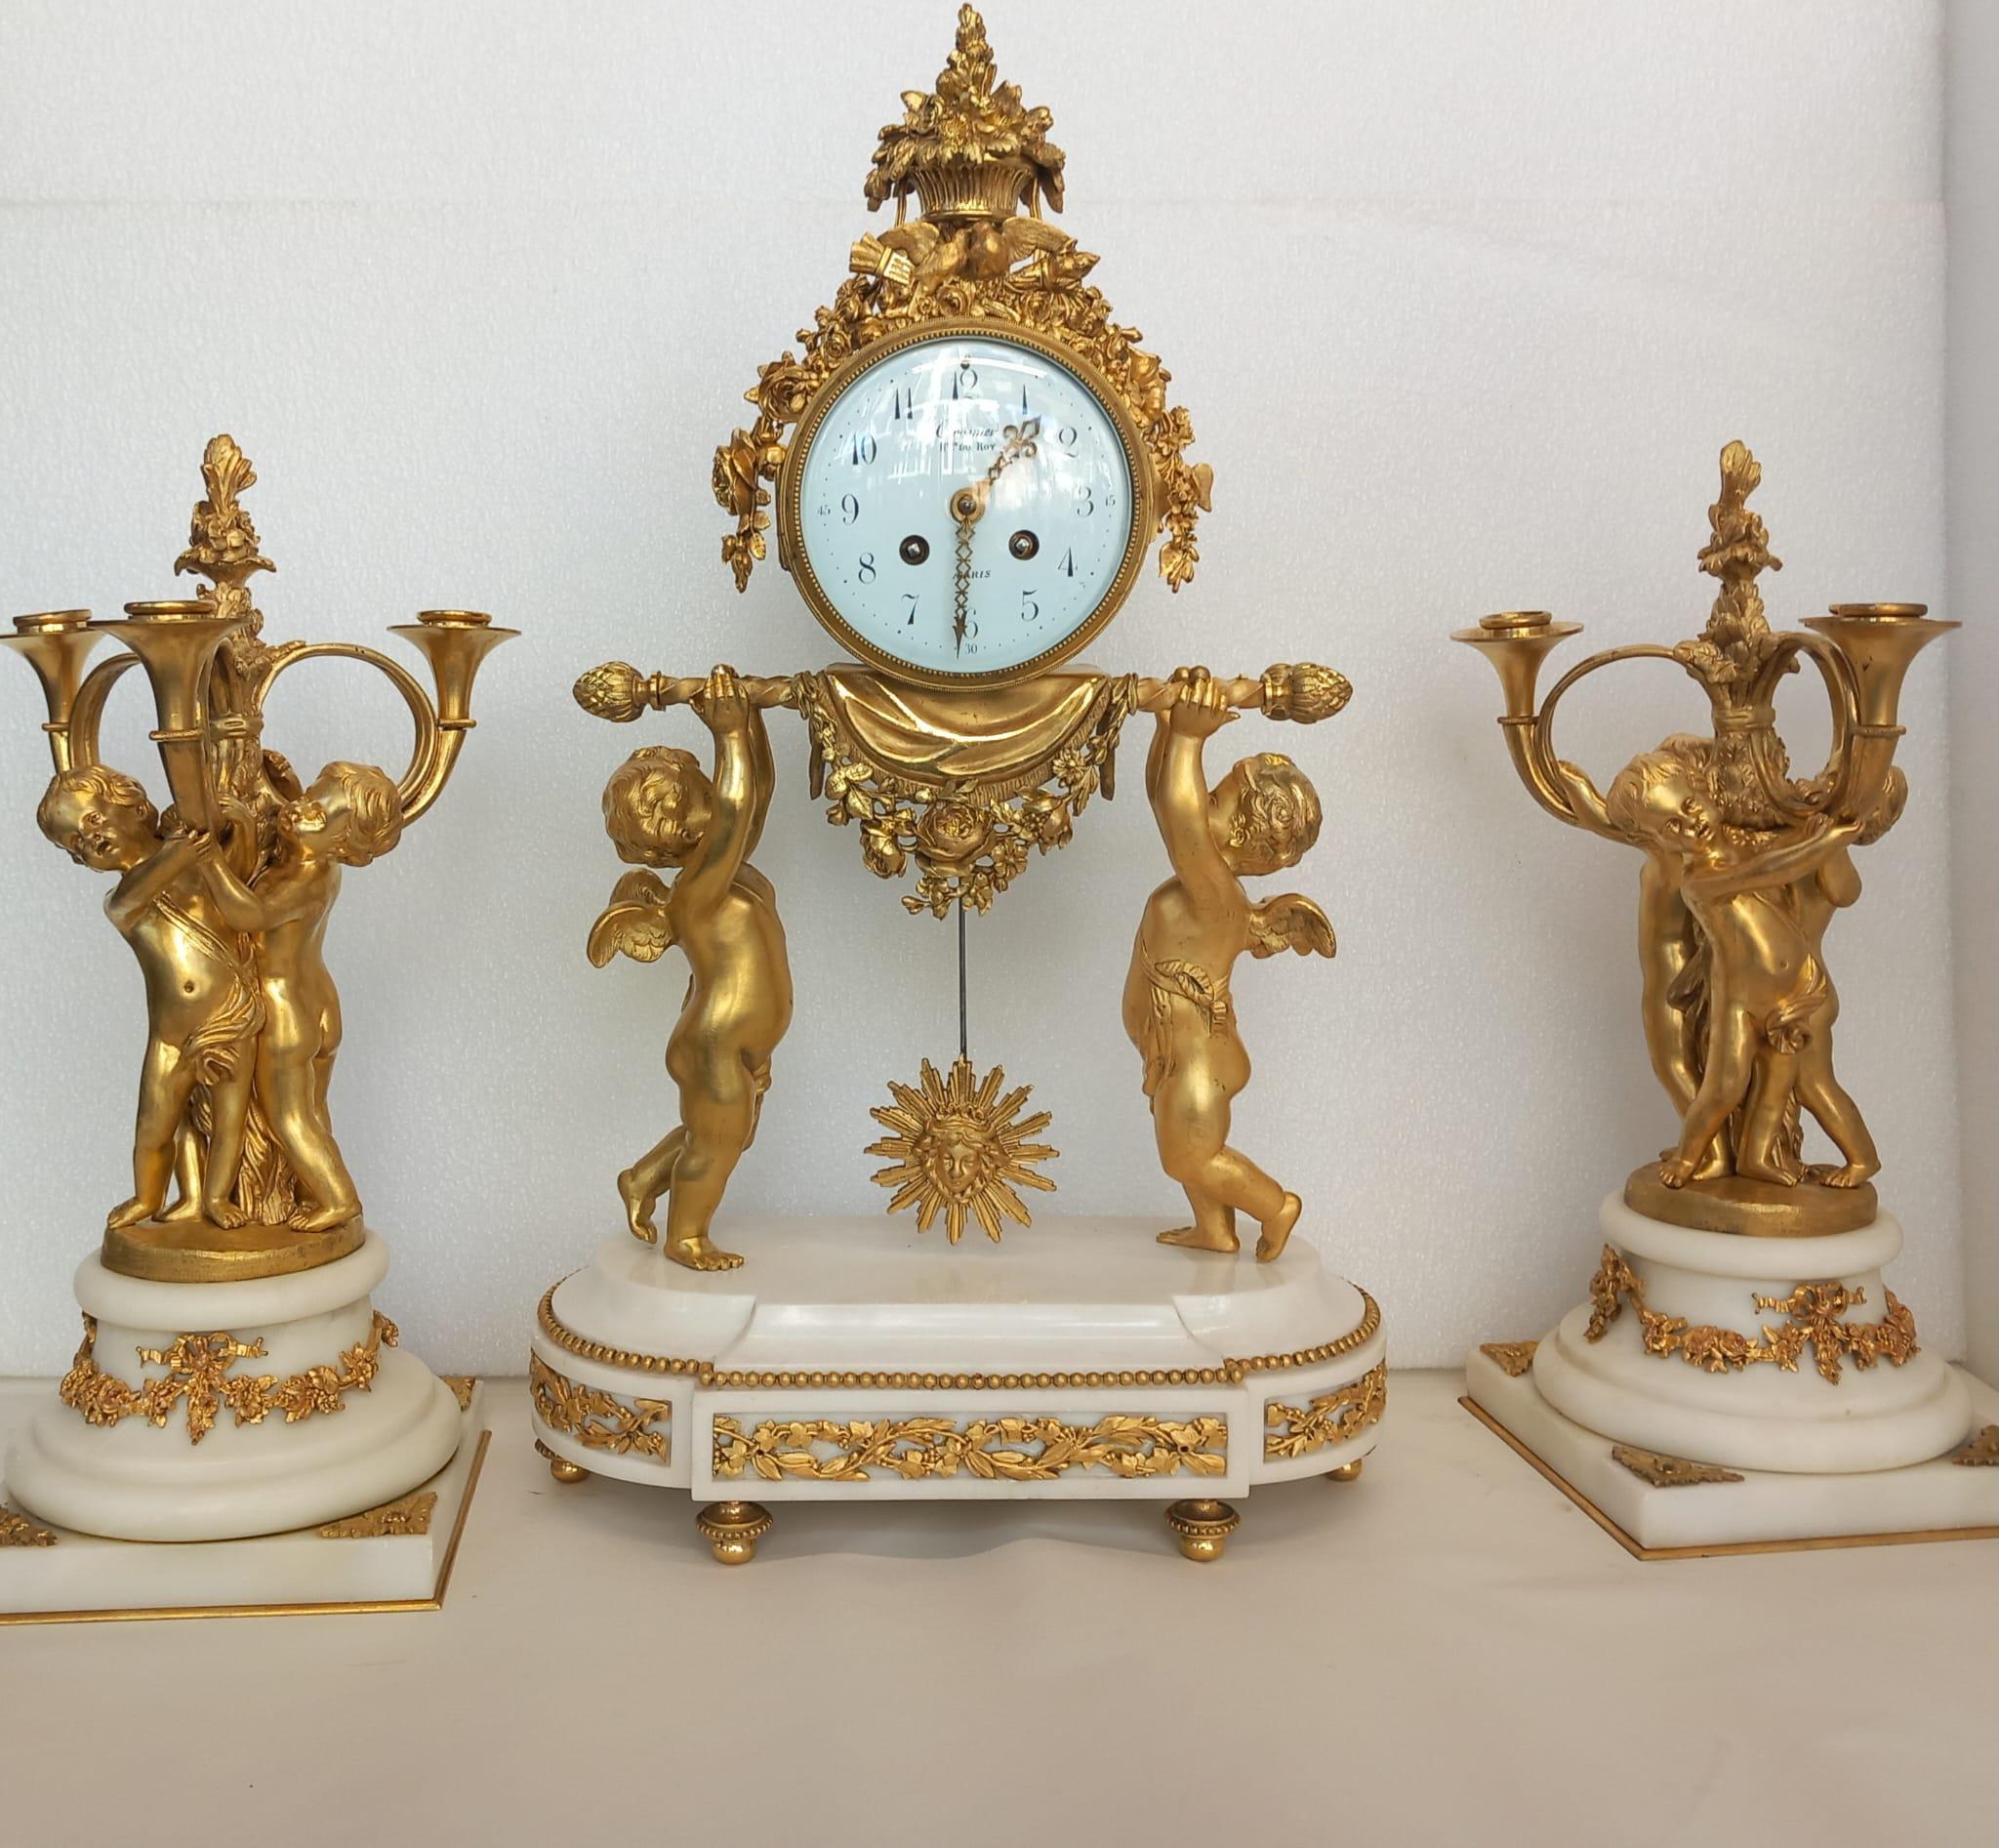 A French 19th Century gilt bronze clock garniture. The clock has two cherubs, holding the clock, on a white marble and Ormolu mounted base. The white enamel has Arabic numbers and chased gilt hands. The side pieces are Ormolu candelabras, cast in